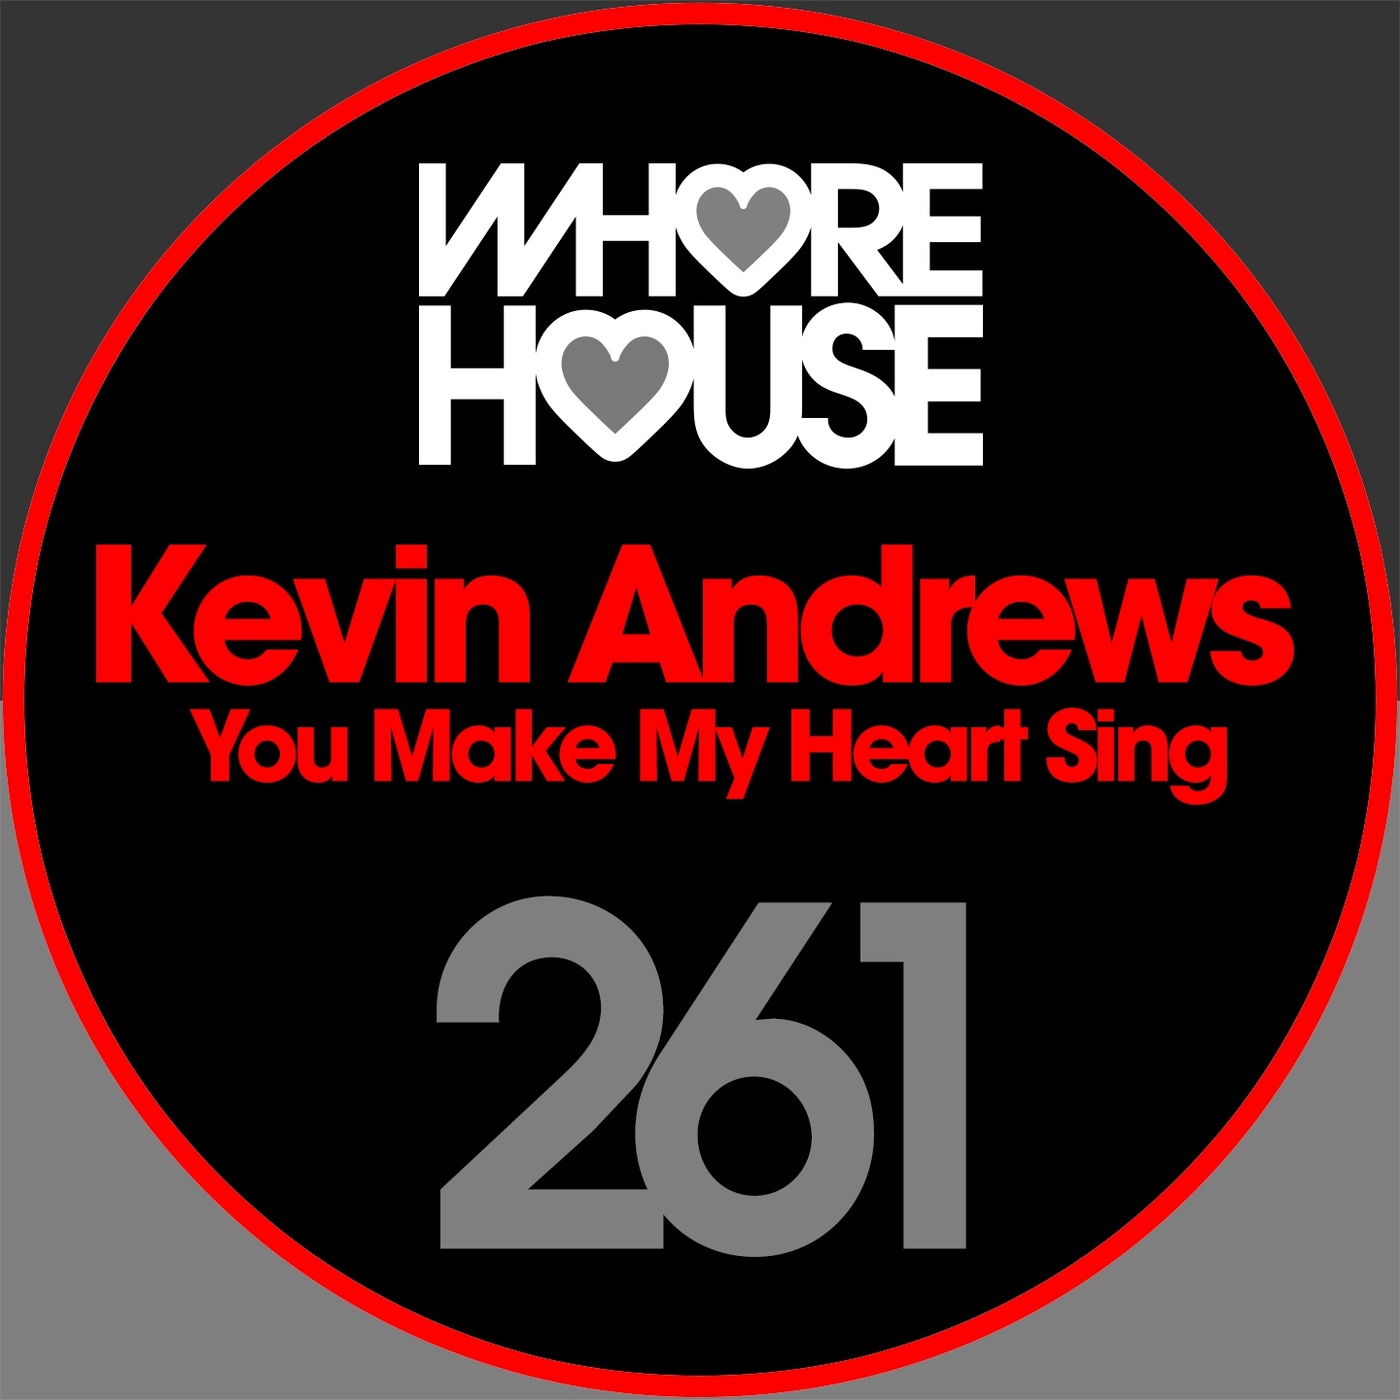 Kevin Andrews - You Make My Heart Sing / Whore House Recordings